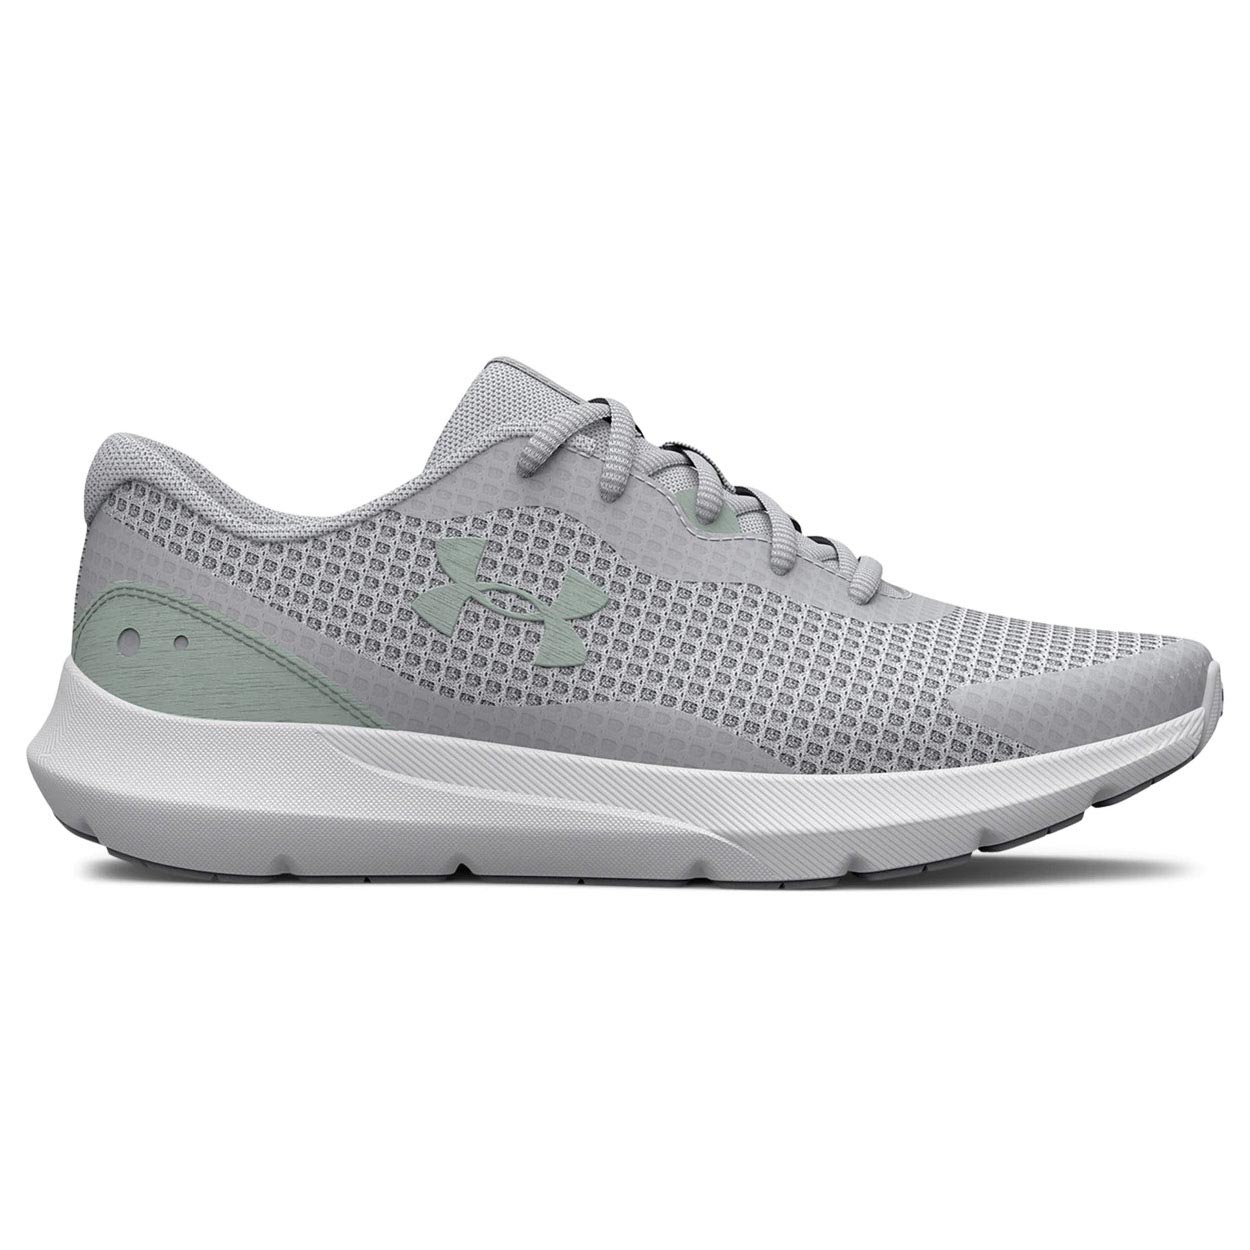 UNDER ARMOUR SURGE 3 WOMENS RUNNING SHOES